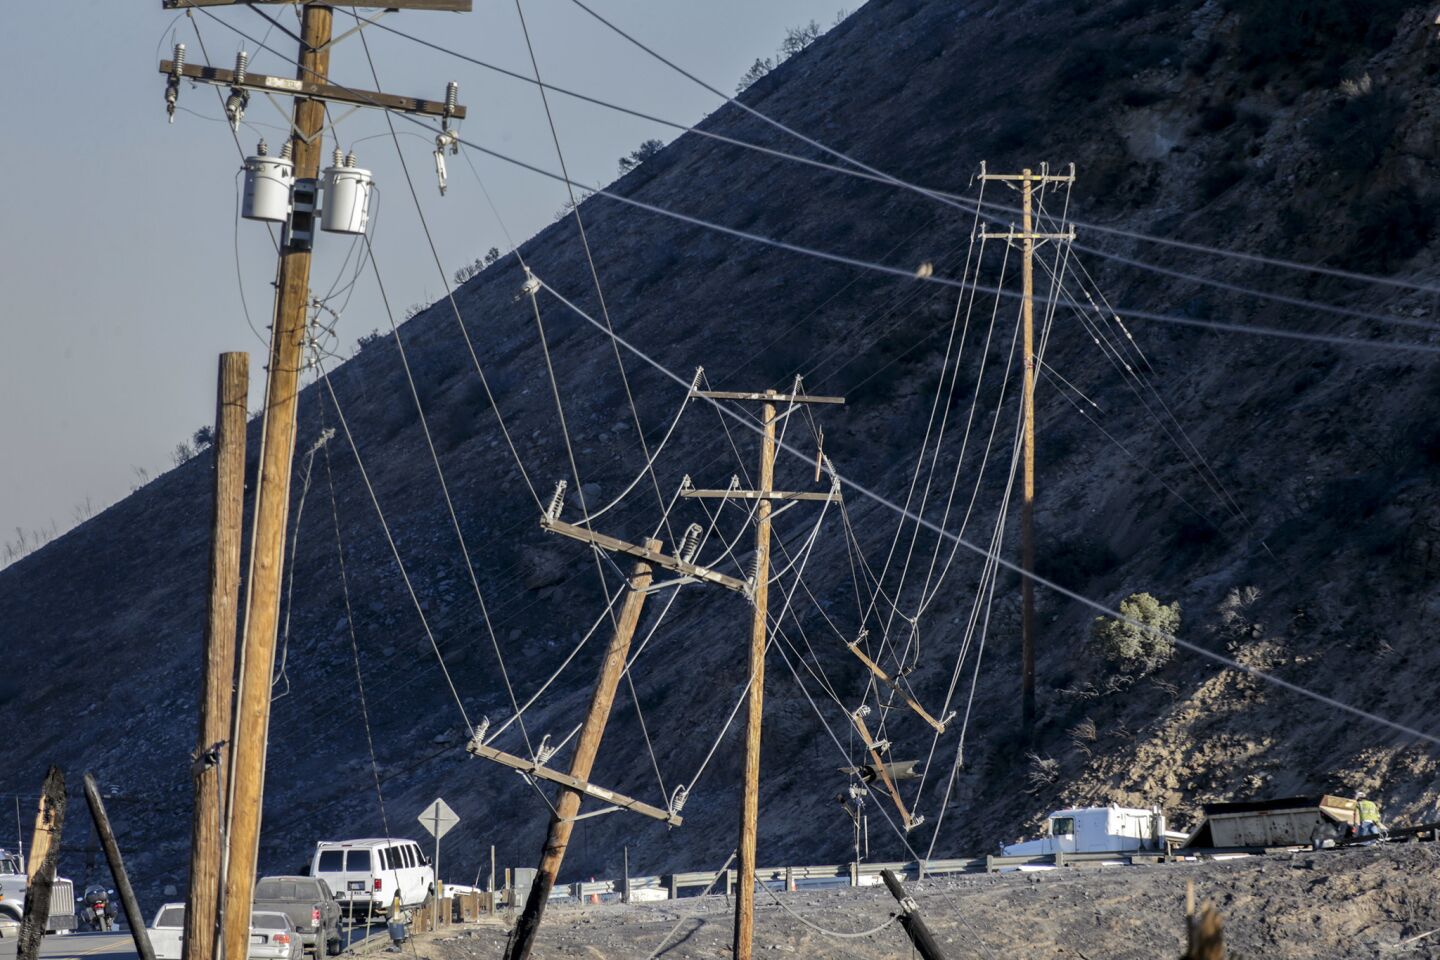 Work crew prepare to repair downed power lines damaged by the Blue Cut fire on Highway 138 at the junction of 15 Freeway.